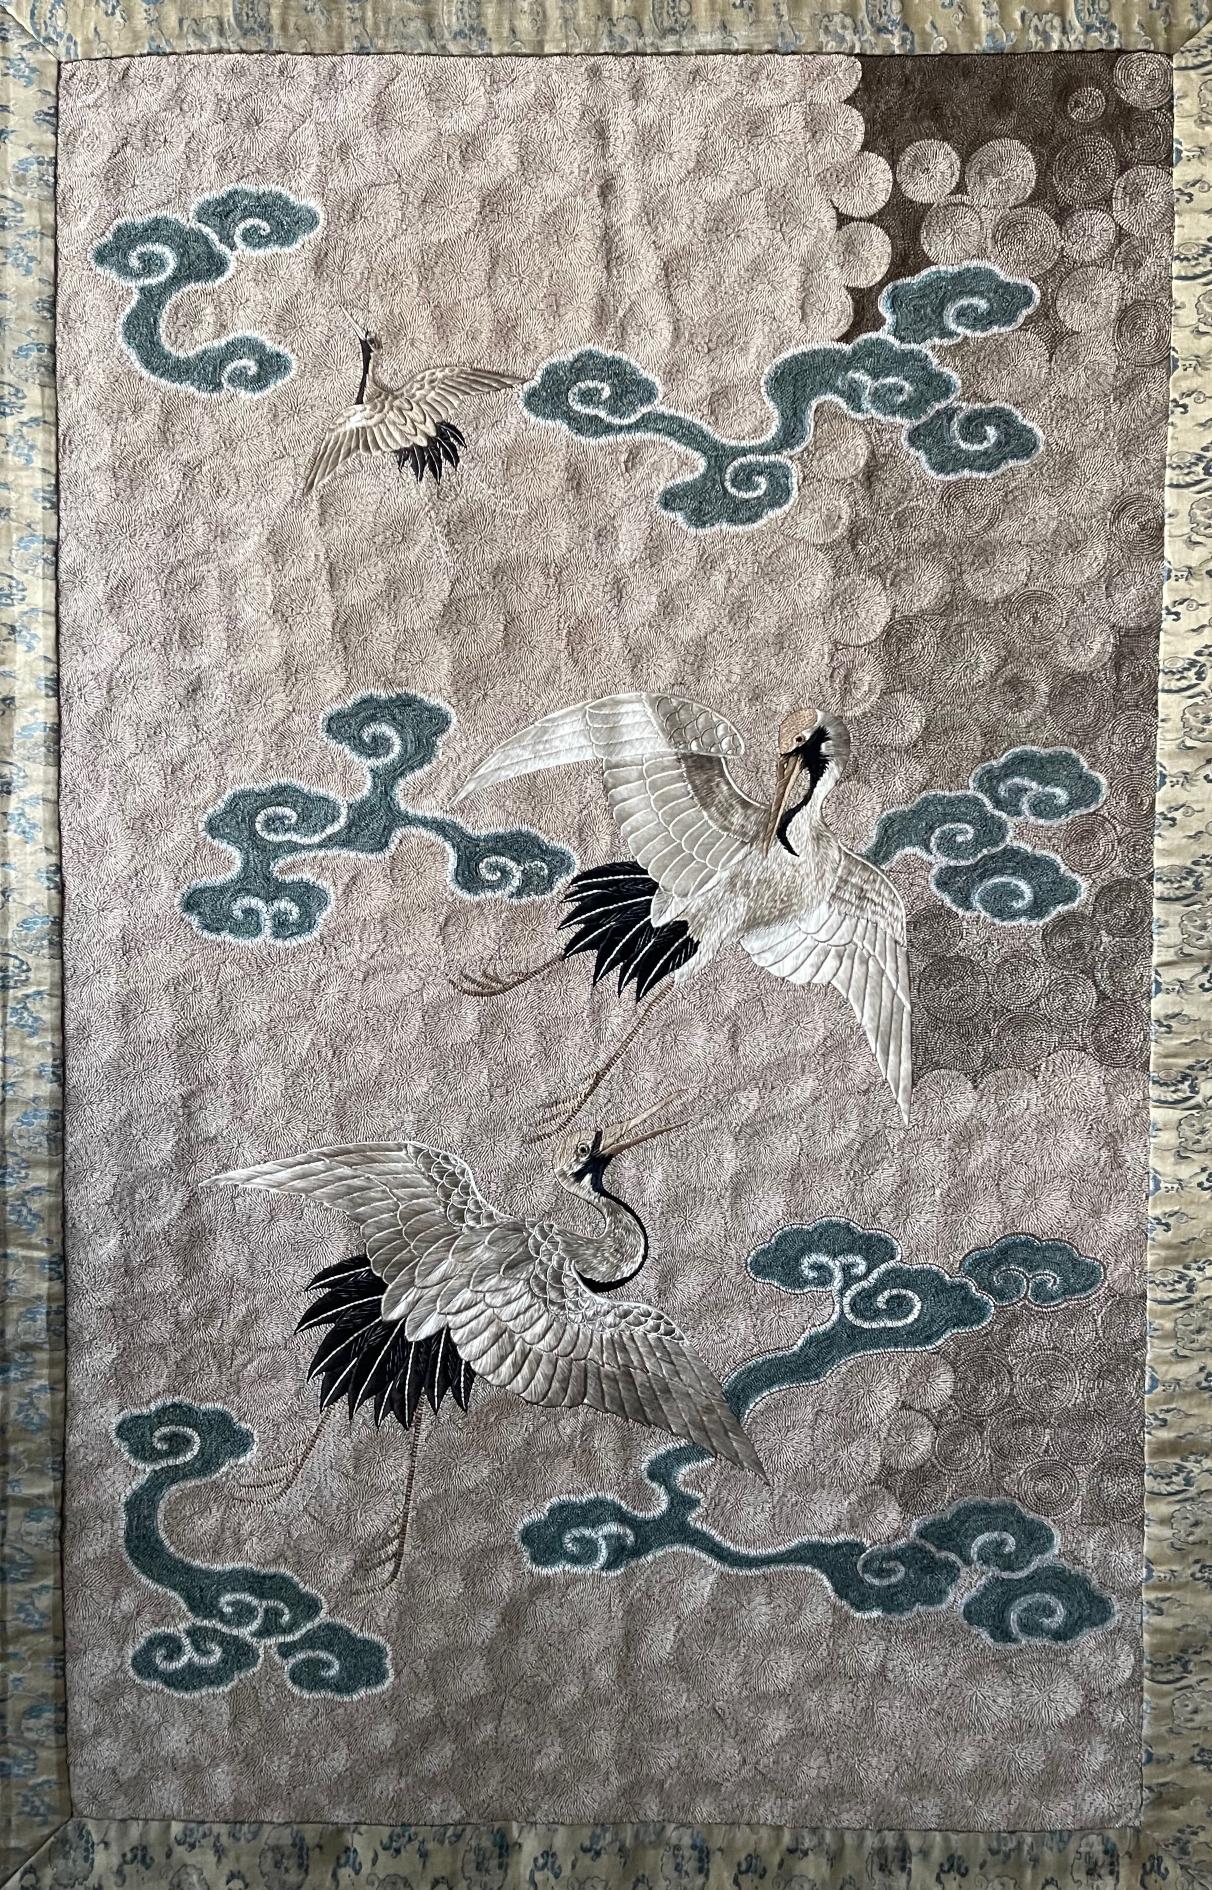 A Japanese embroidered textile panel presented in an acrylic shadow box frame, circa end of 19th to 1910s Meiji Period. The textile panel depicts three flying cranes among auspicious clouds, one of the most popular subject in Japanese art. Crane is